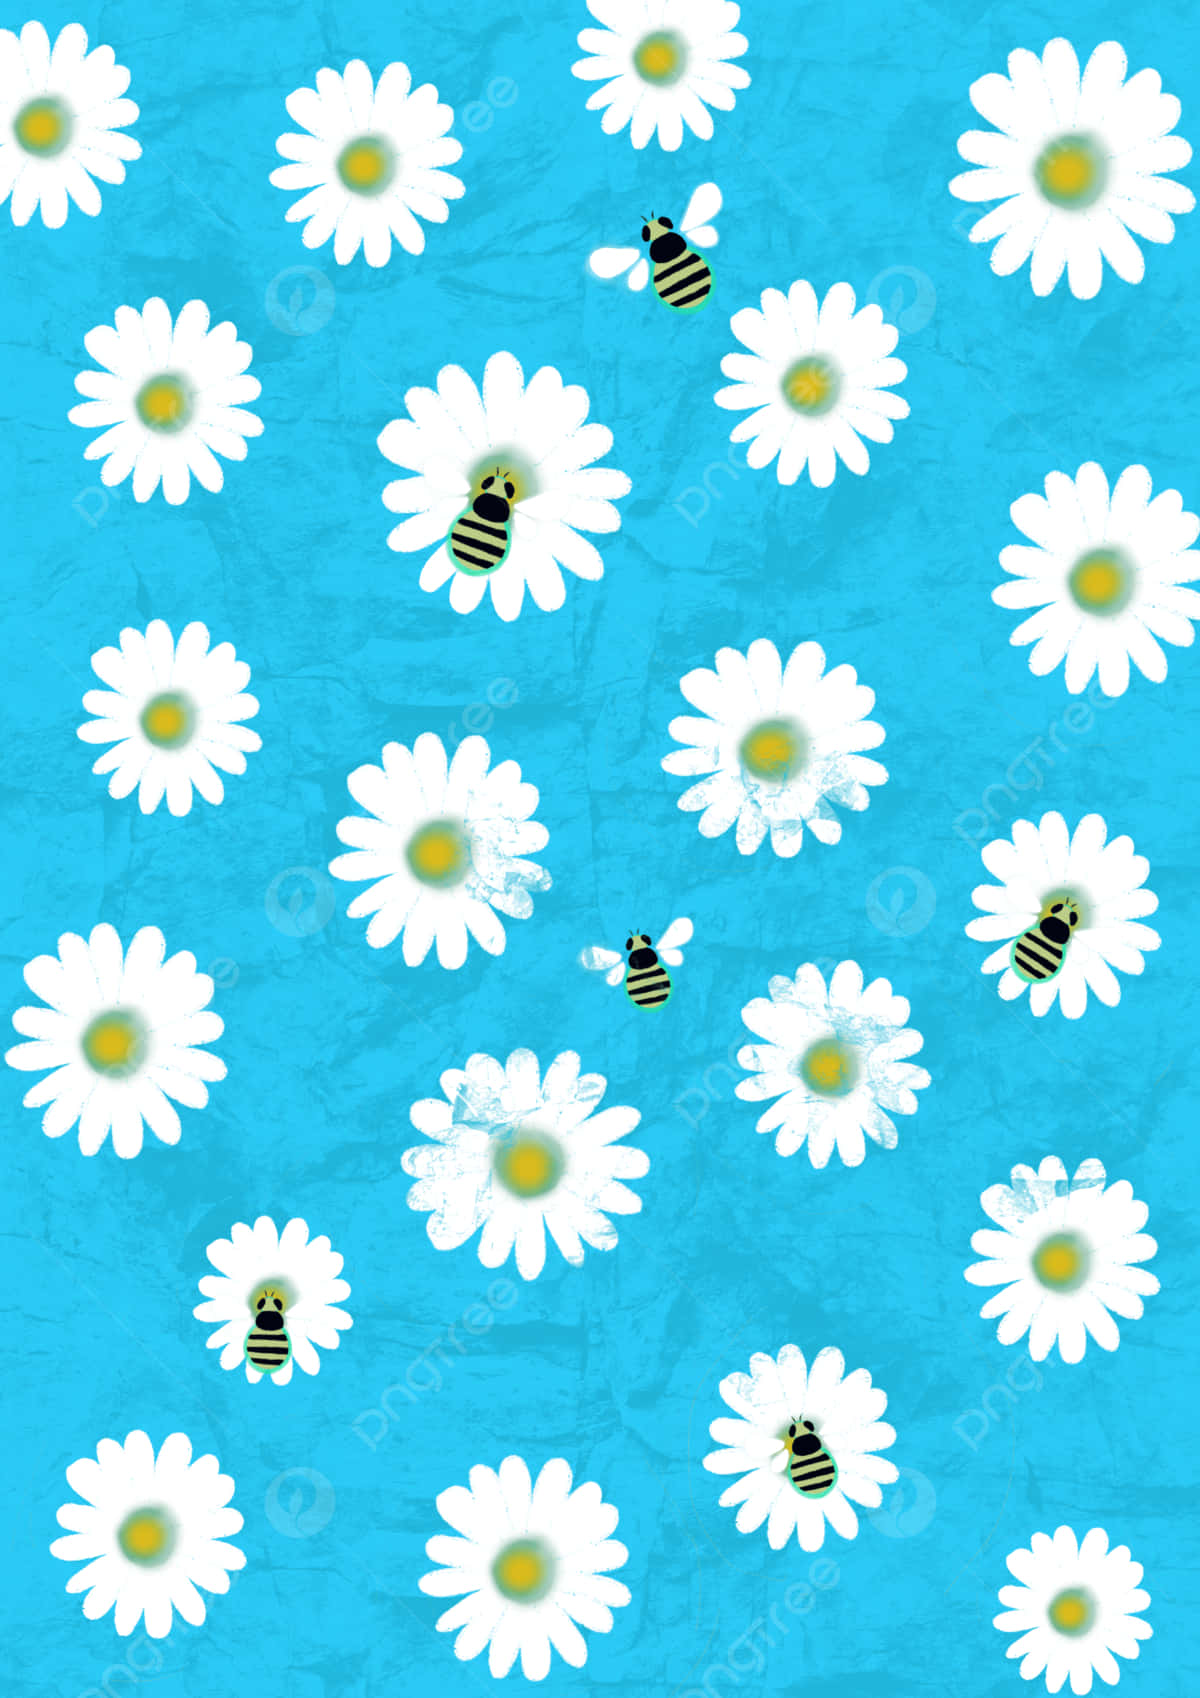 Daisies With Bees On Blue Background Wallpaper